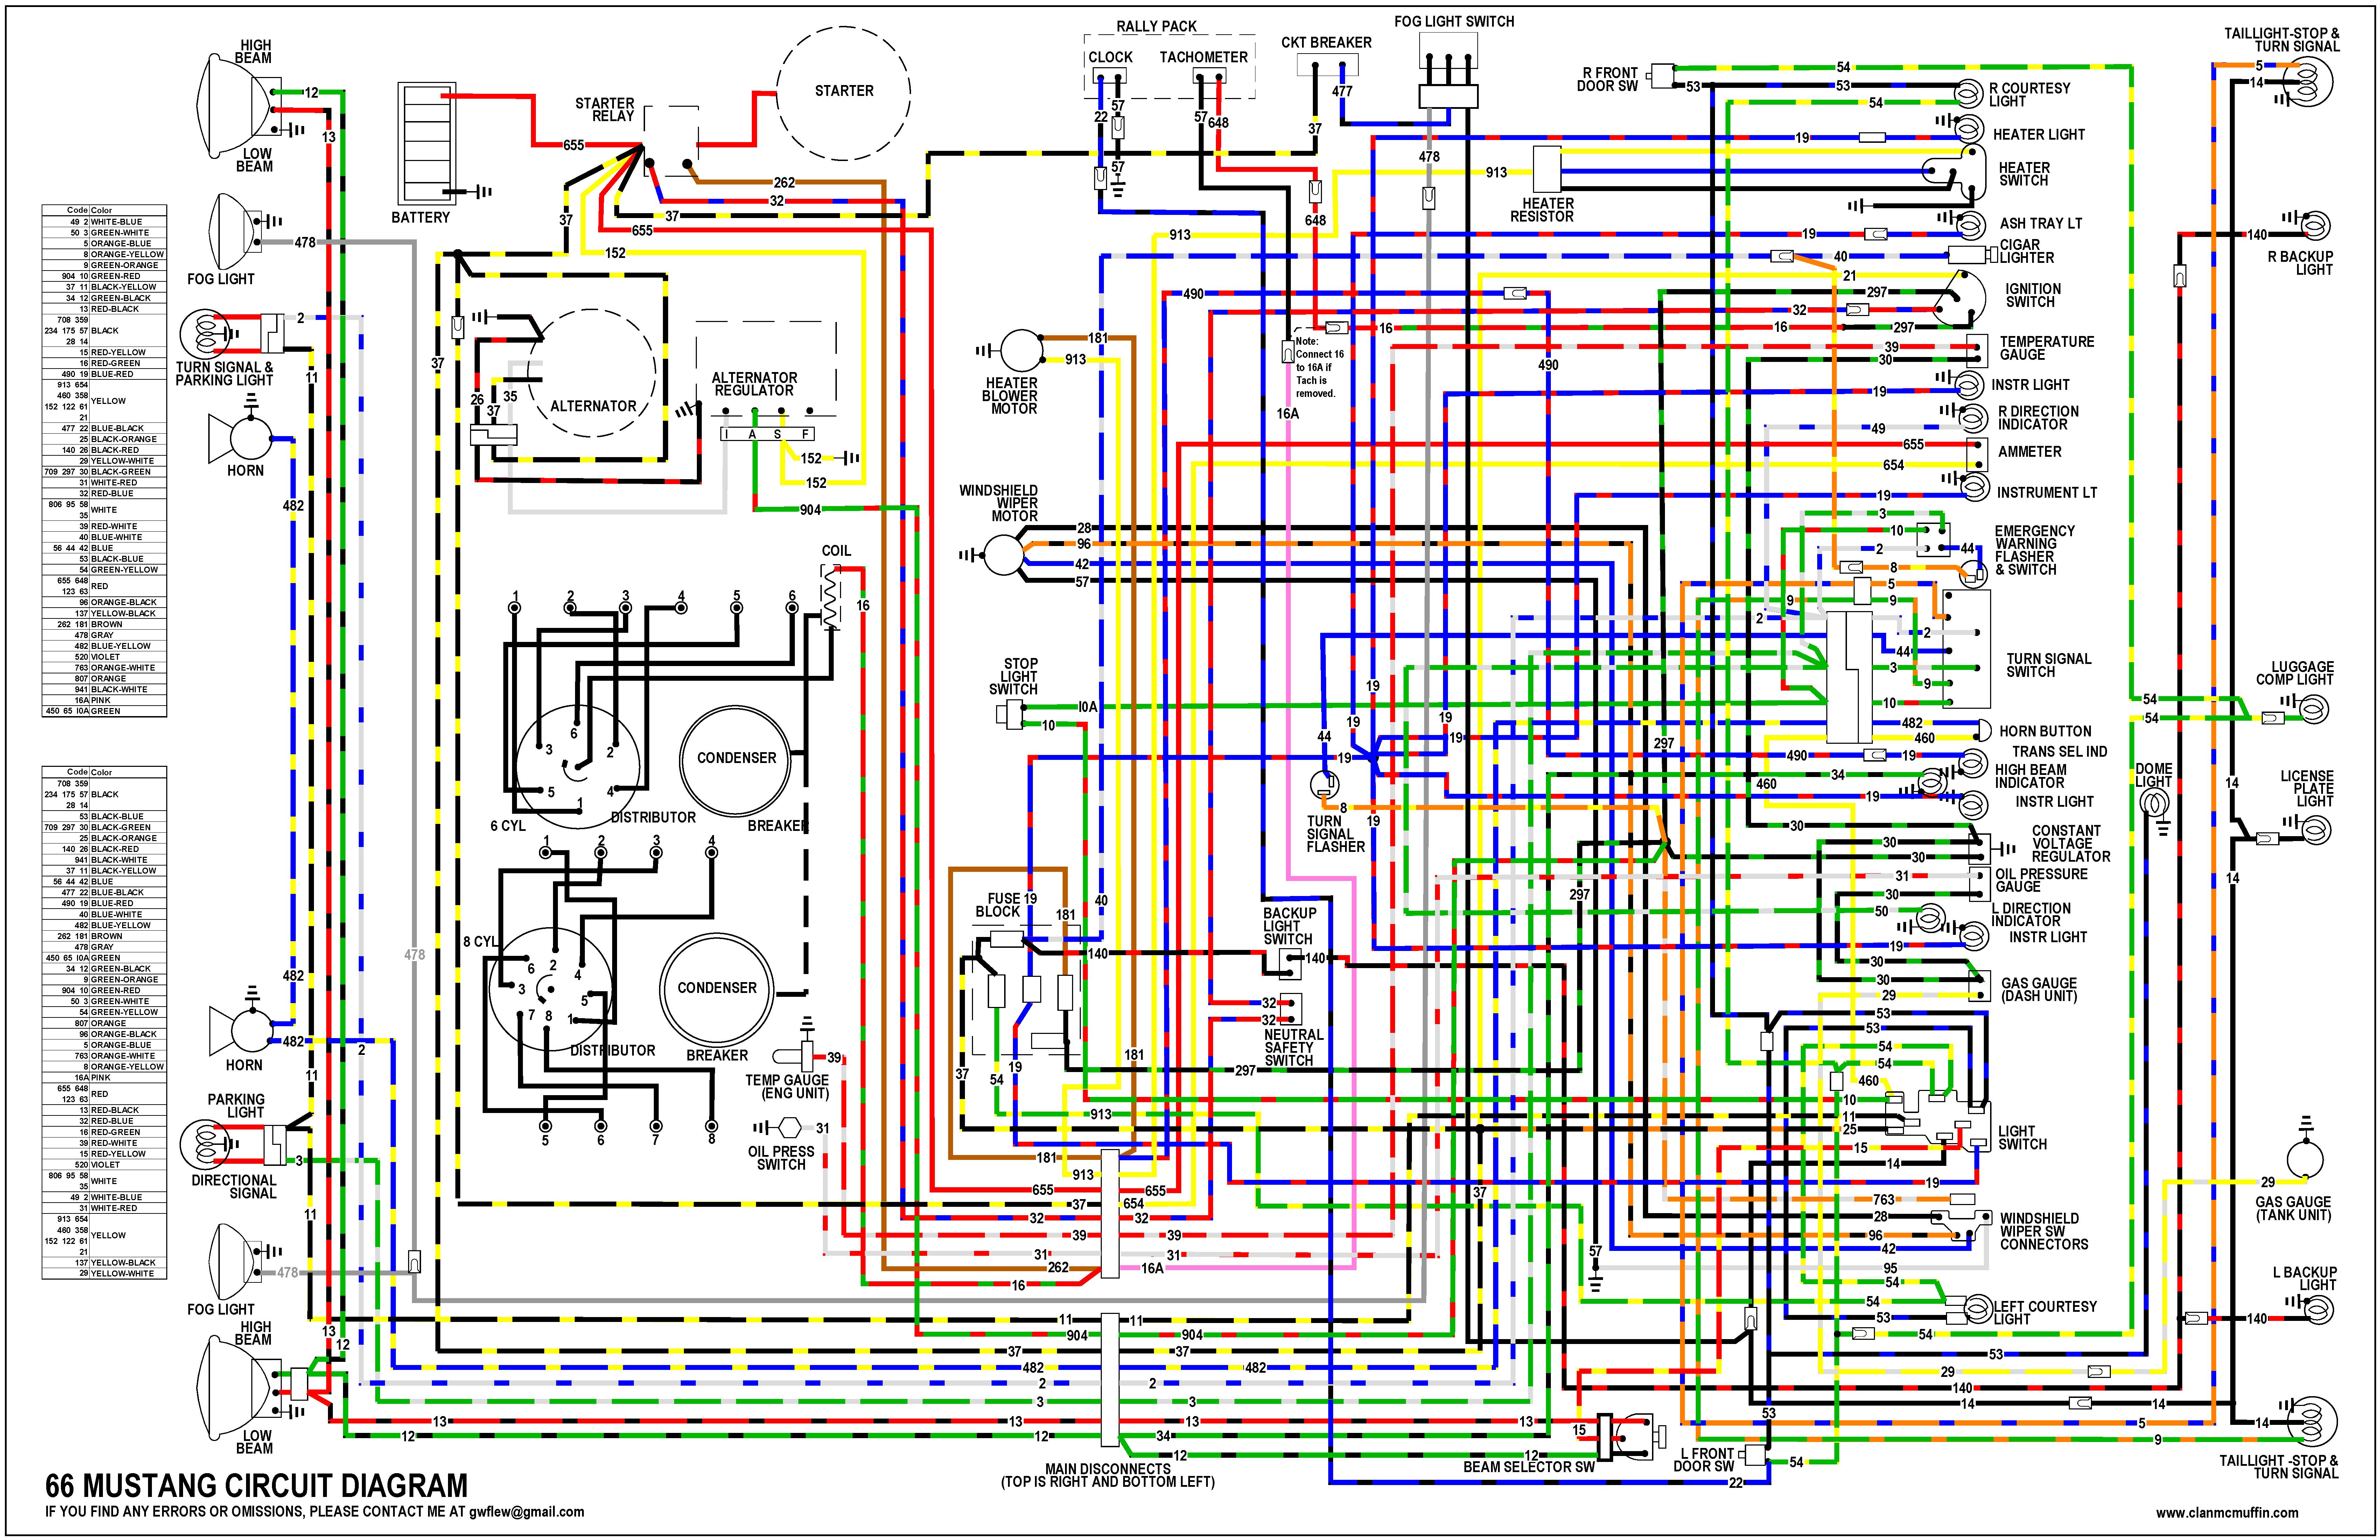 1968 Mustang Wiring Harness Diagram from www.clanmcmuffin.com